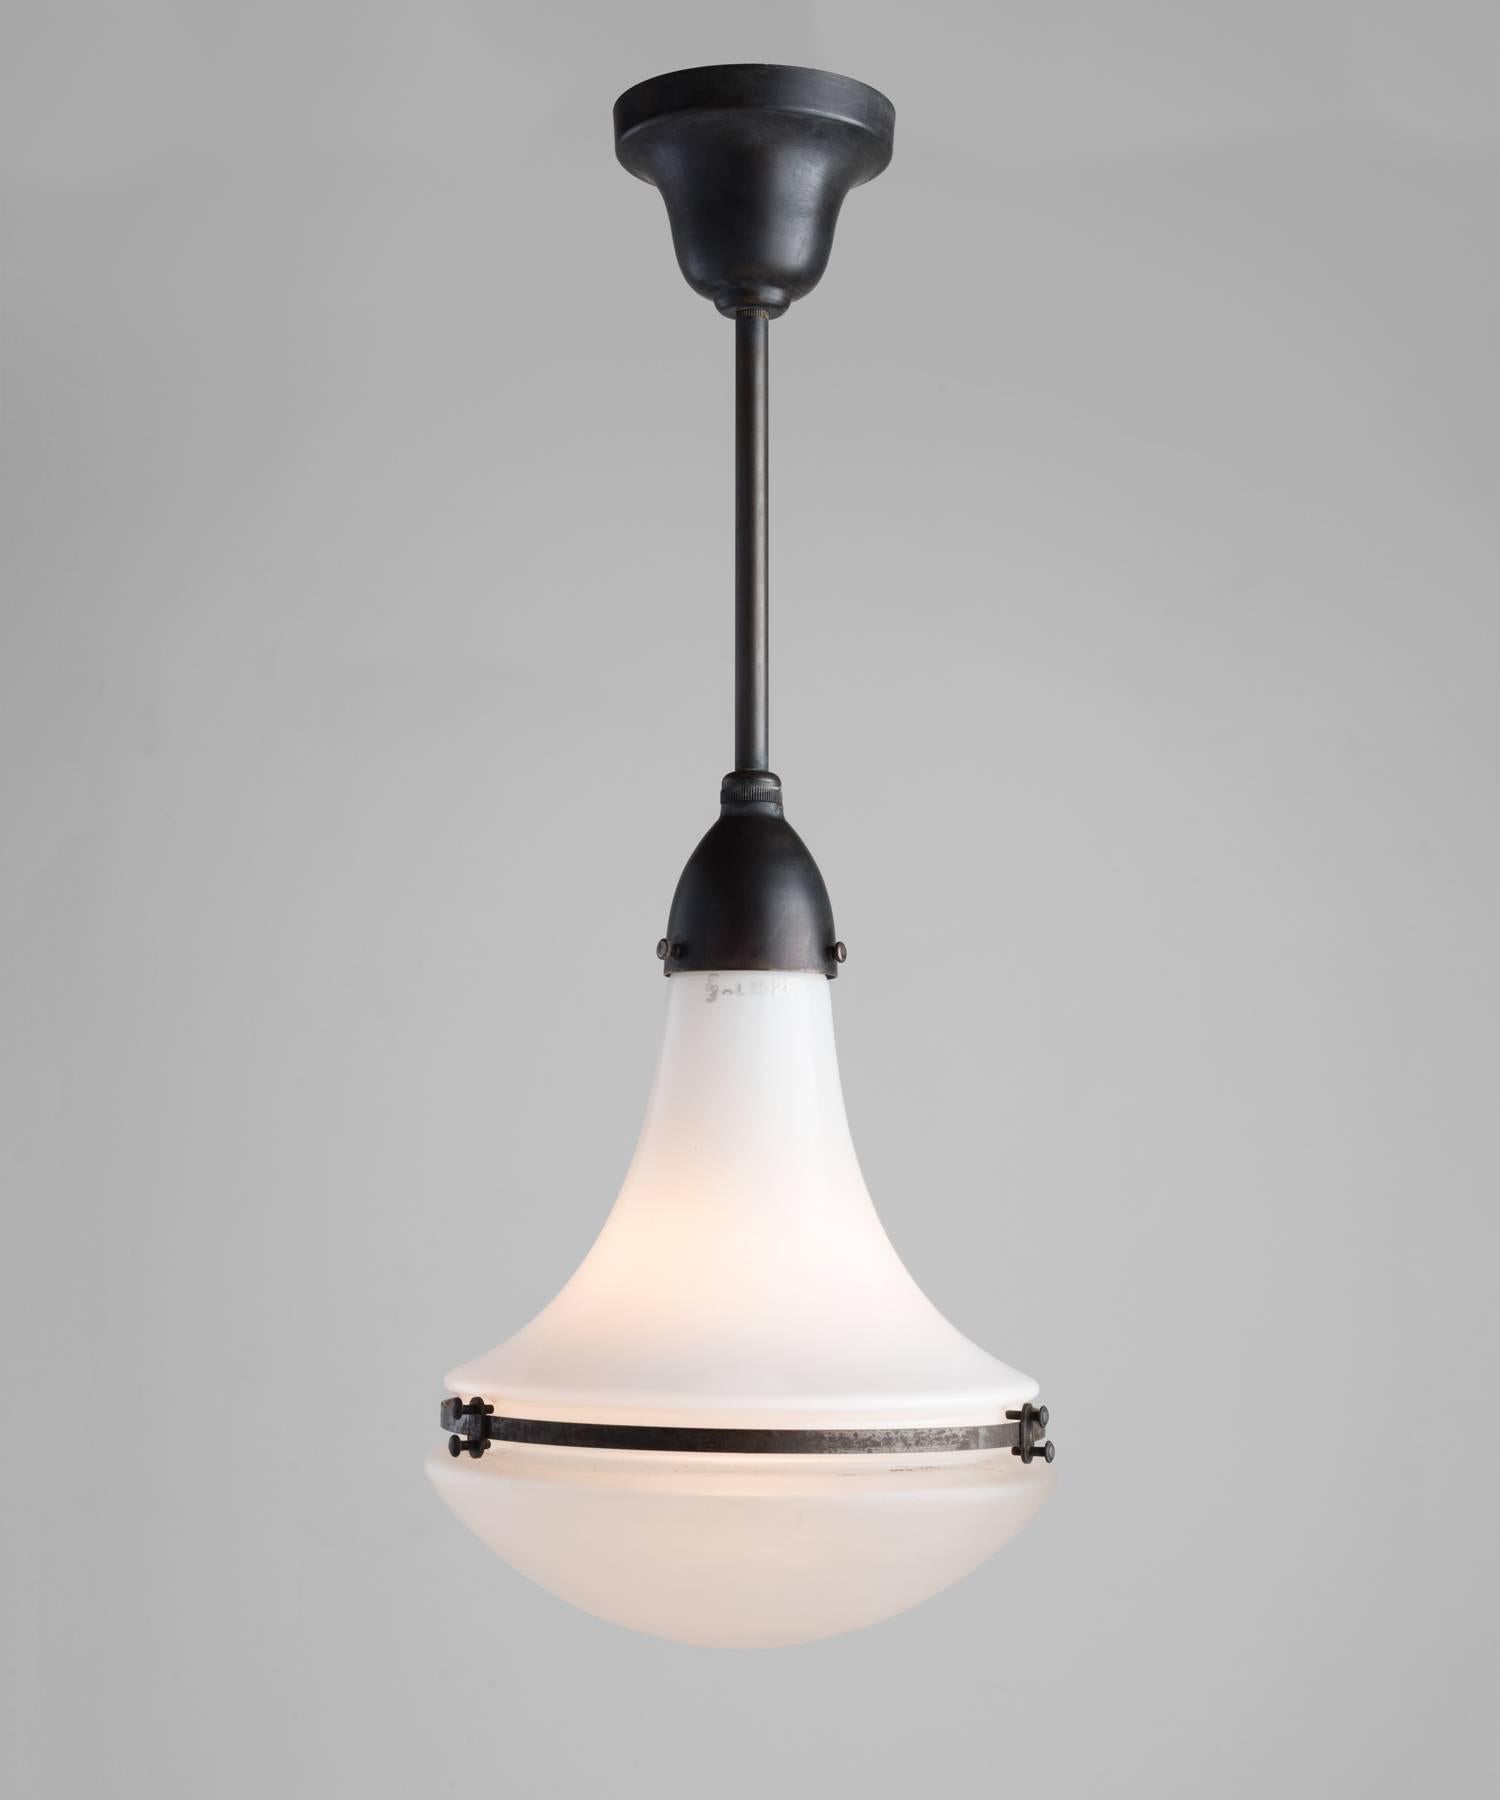 Peter Behrens Luzette pendants, circa 1920.

Opaline glass top with frosted glass bottom secured with copper fitter and brace. Manufactured by AEG Siemens with manufacturer's mark.

Primary element height is 12